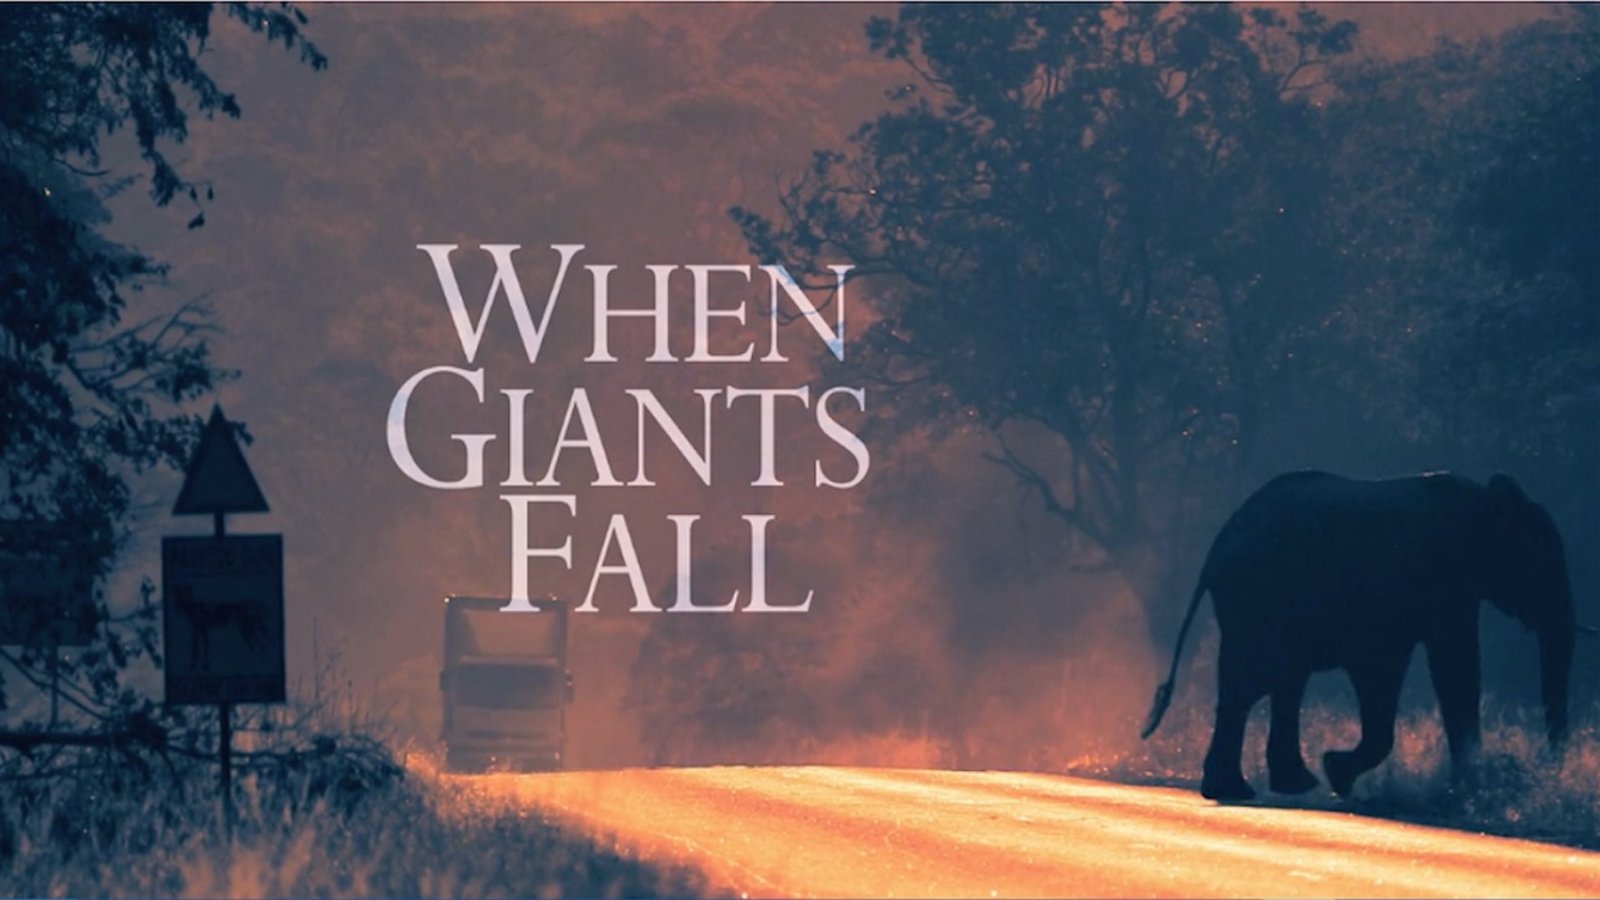 When Giants Fall - The Ivory Trade